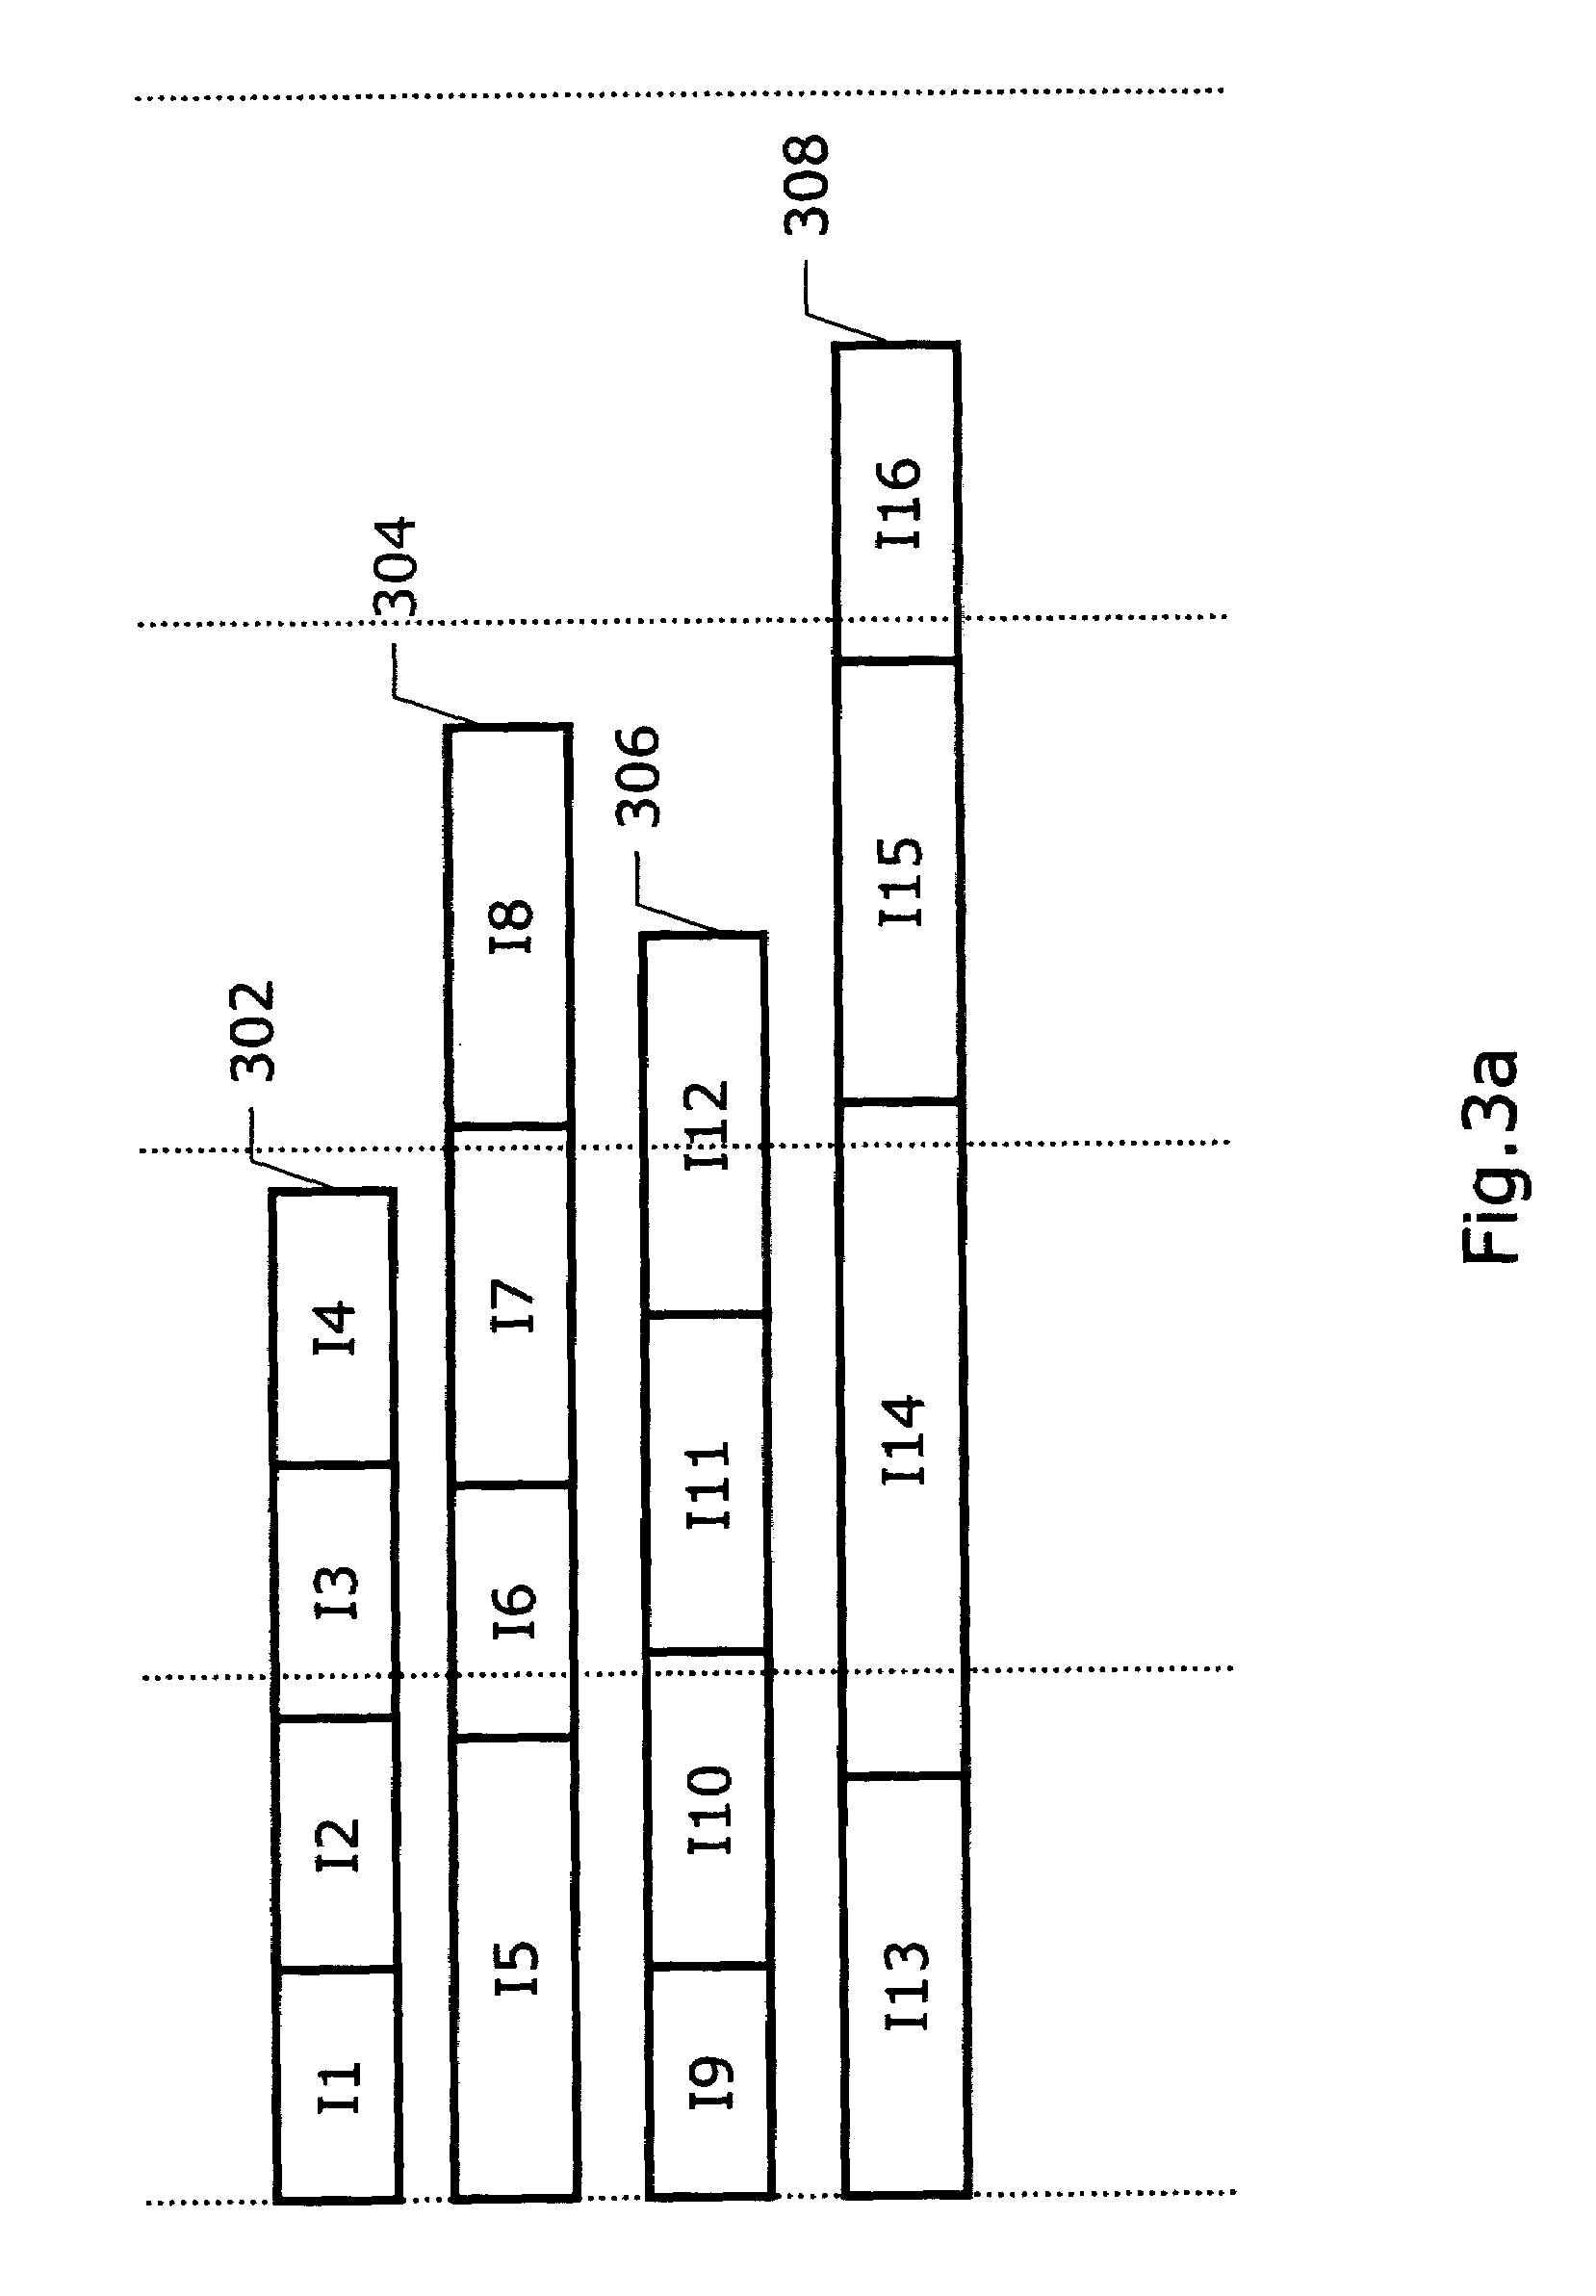 Maintaining original per-block number of instructions by inserting NOPs among compressed instructions in compressed block of length compressed by predetermined ratio